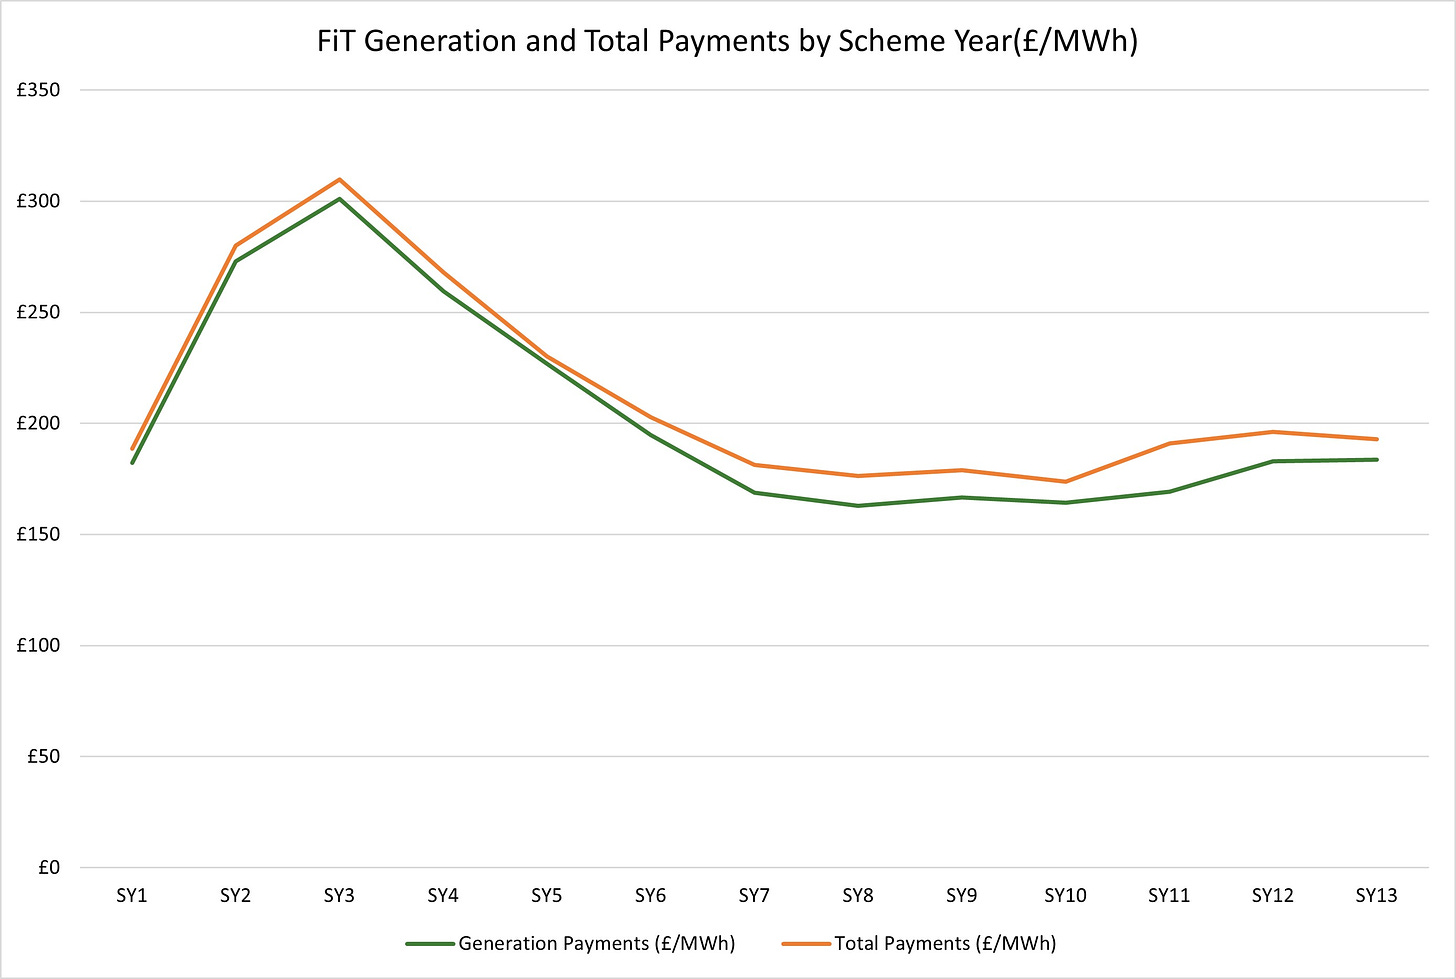 Figure A - Feed-in-Tariff (FiT) Generation and Total Payments (£ per MWh)